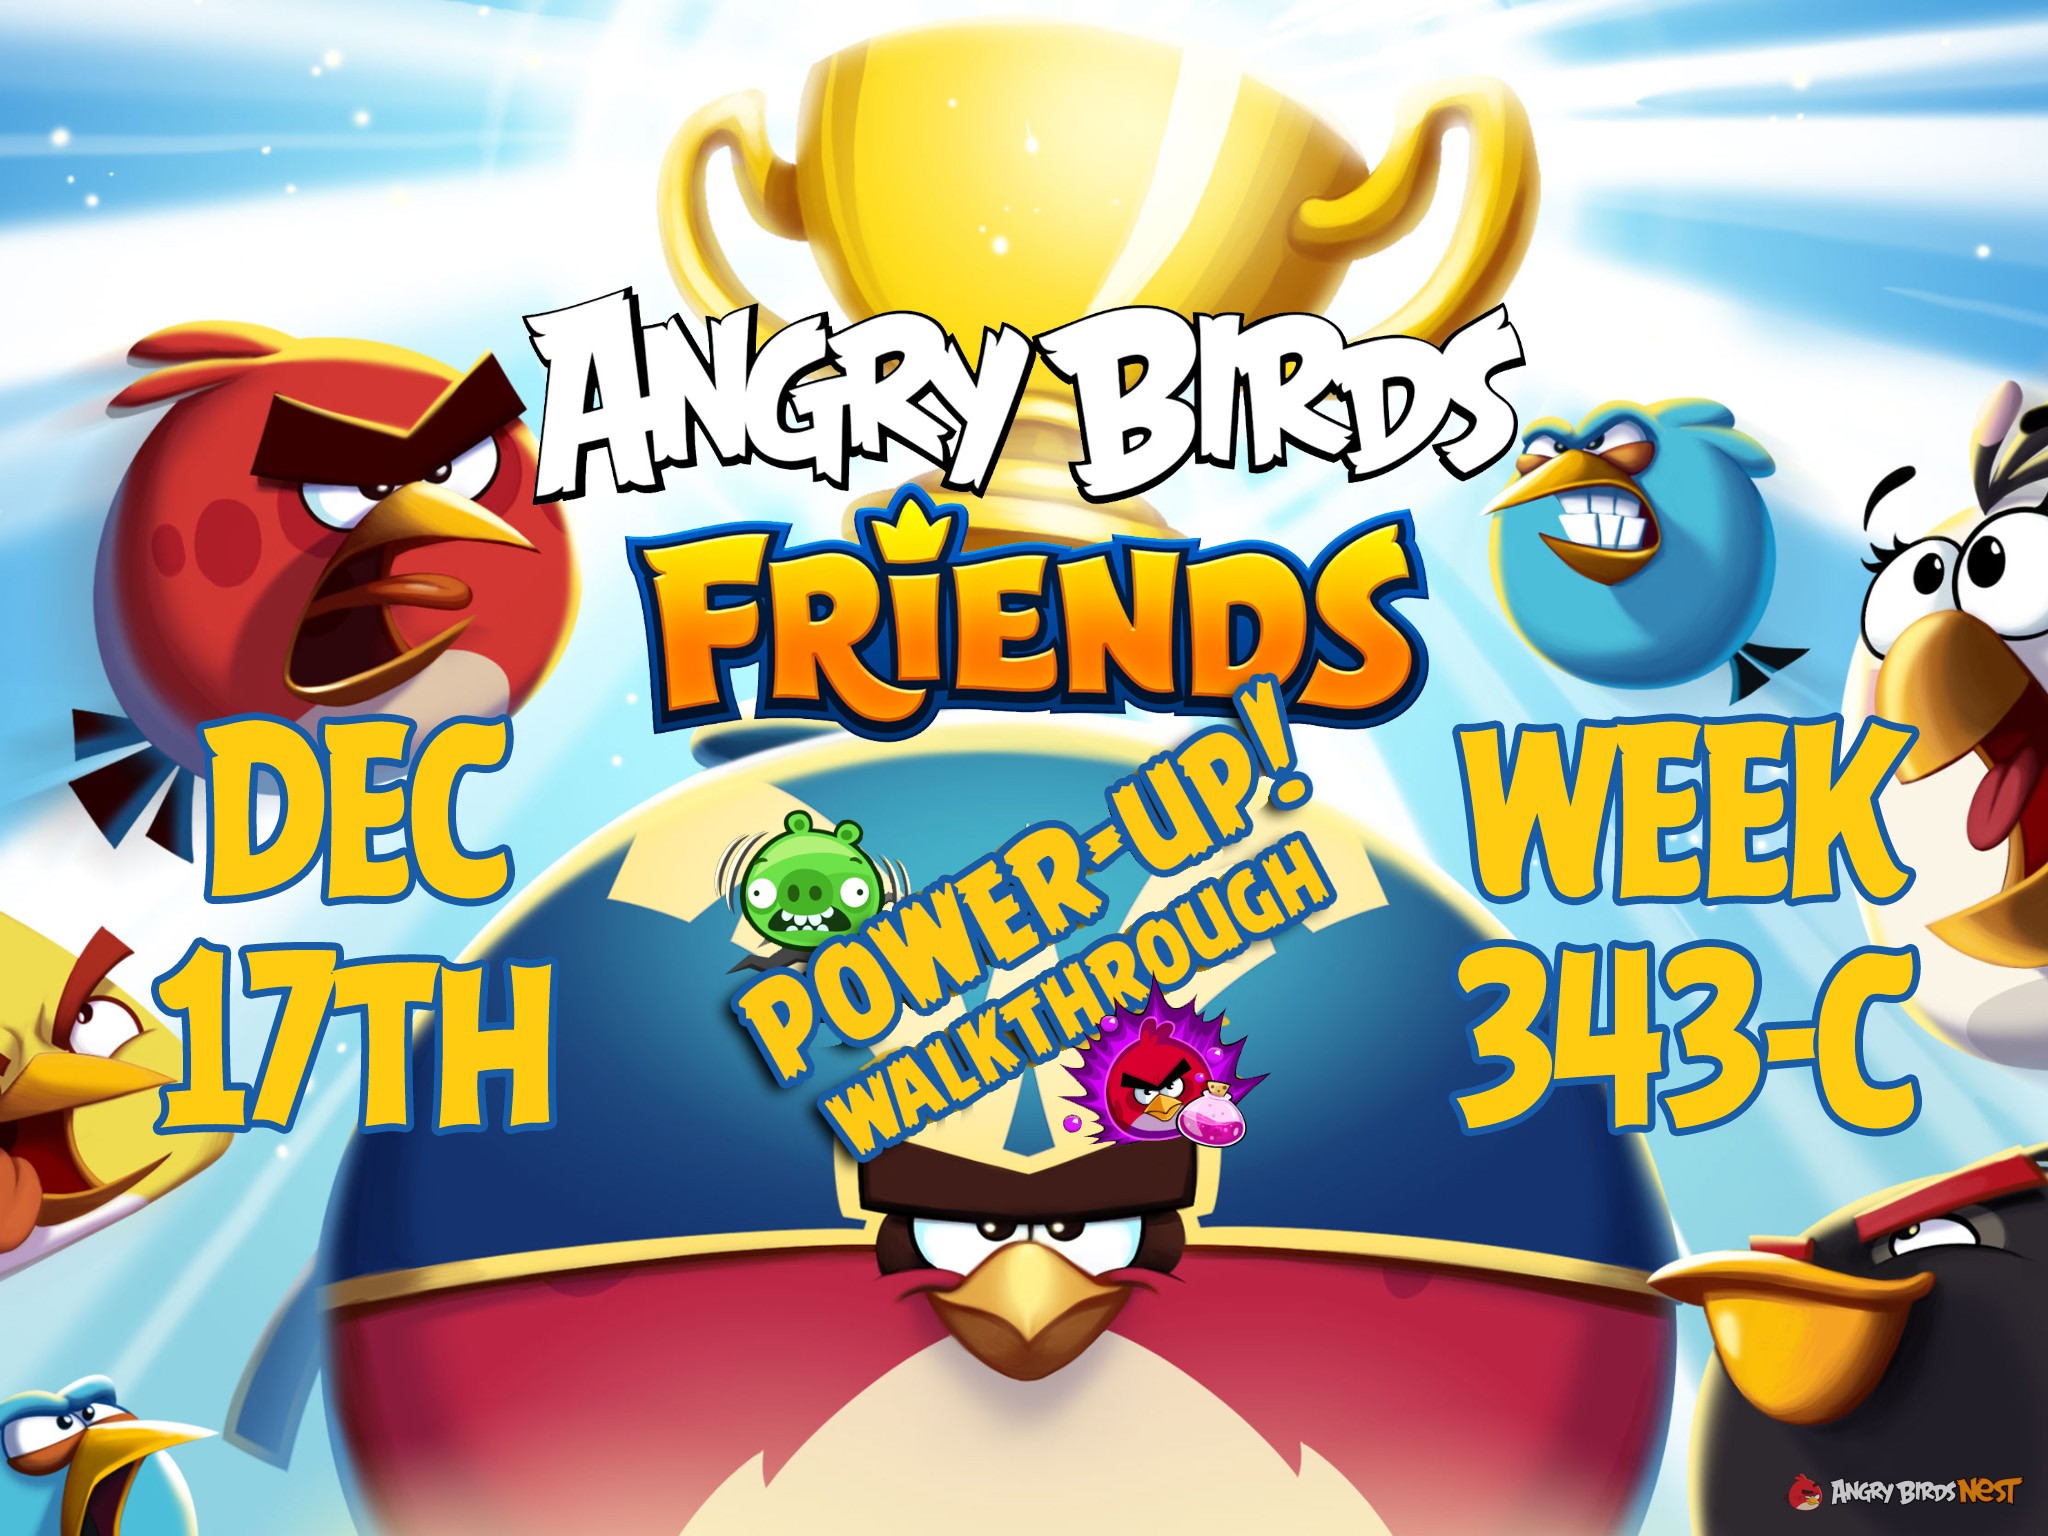 Angry-Birds-Friends-Tournament-Week-343-C-Feature-Image-PU